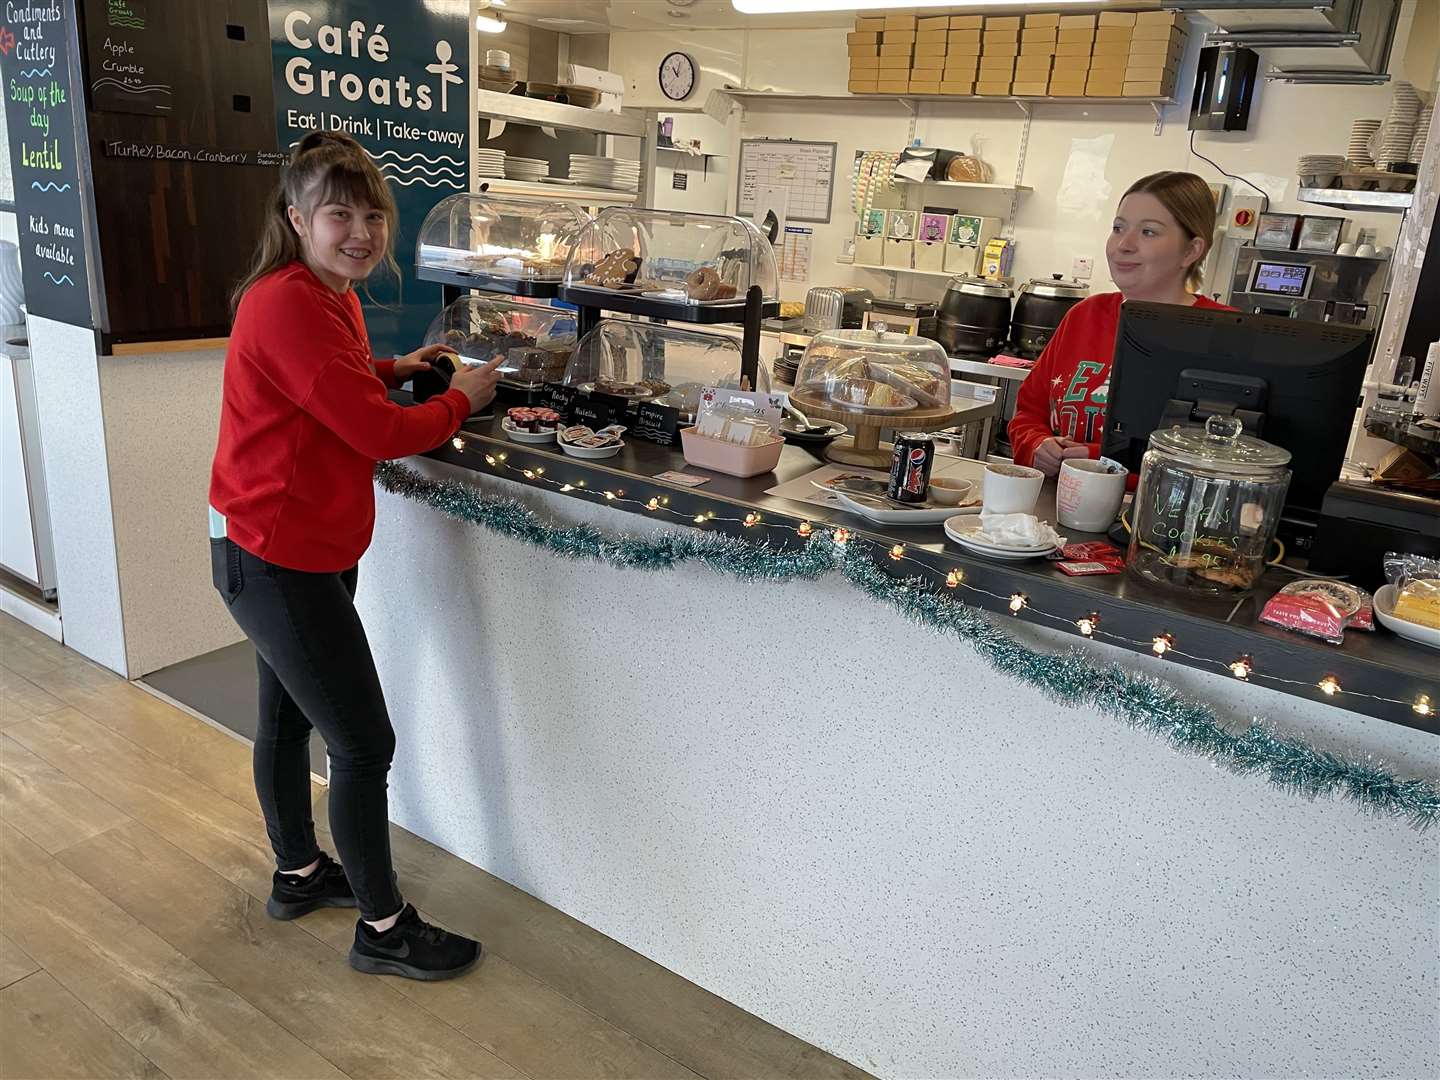 All ready to serve the customers at Café Groats.